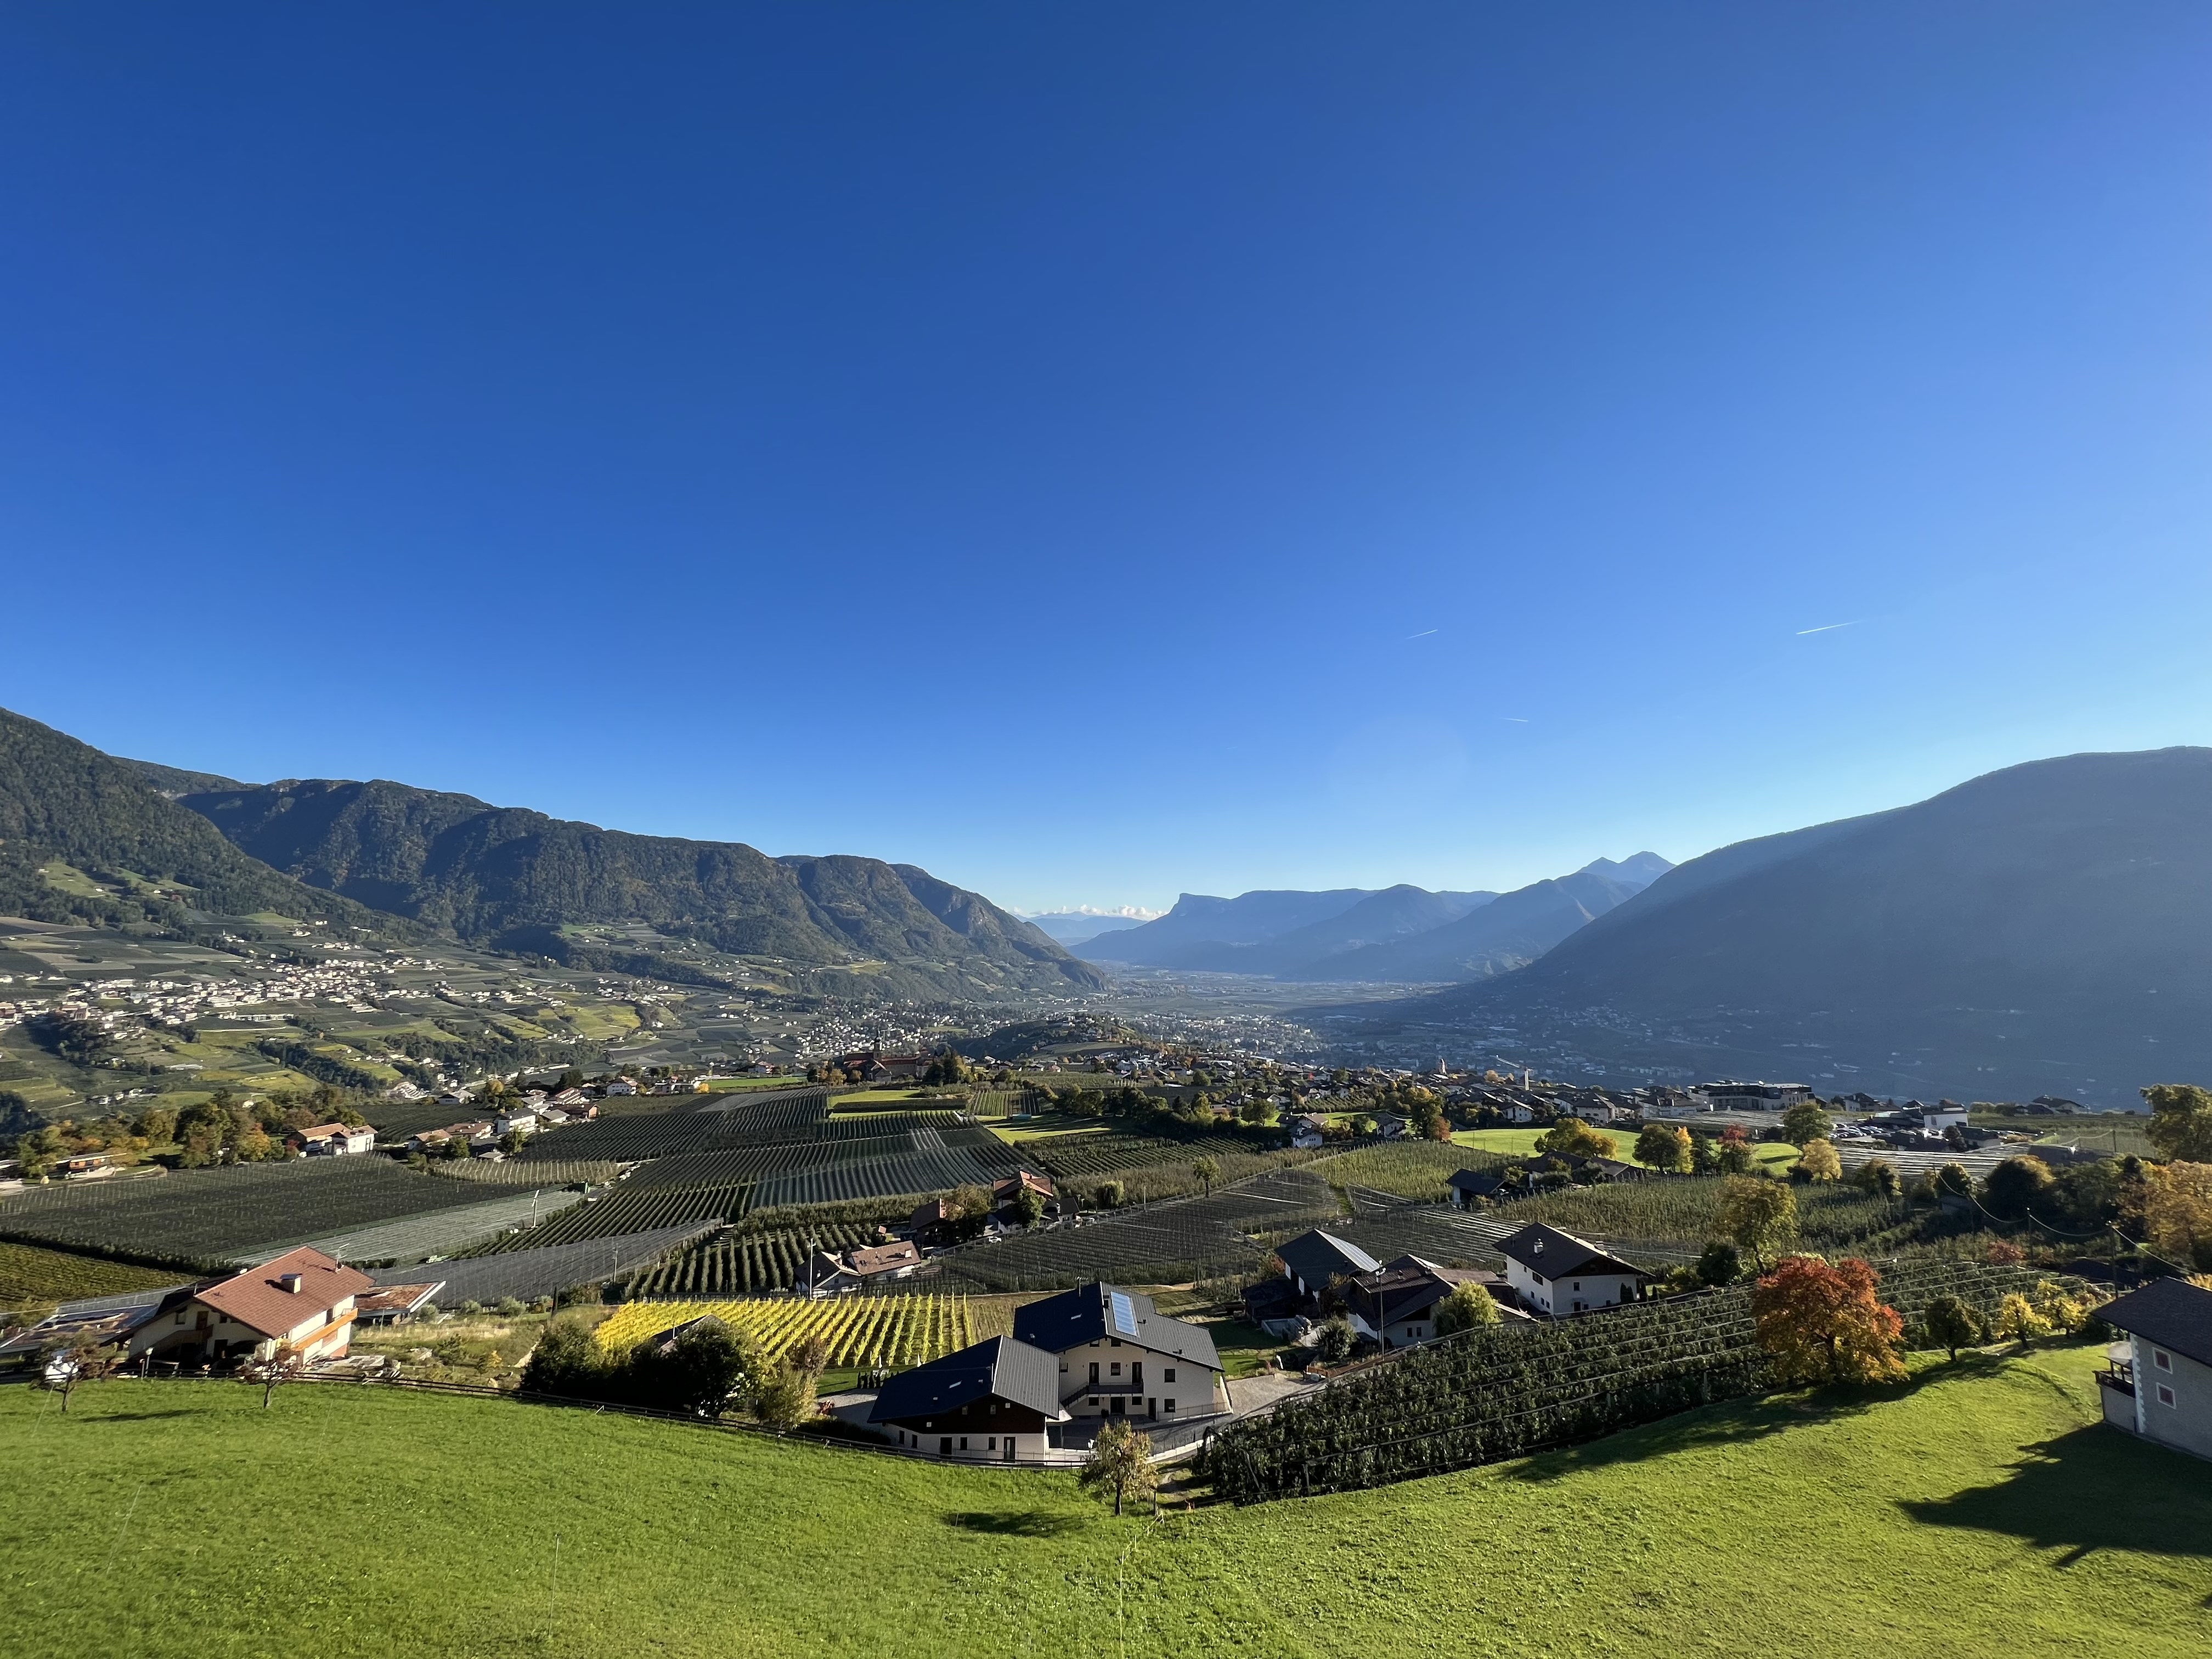 View panorama spa town Merano Valle dell'Adige Hotel Lechner